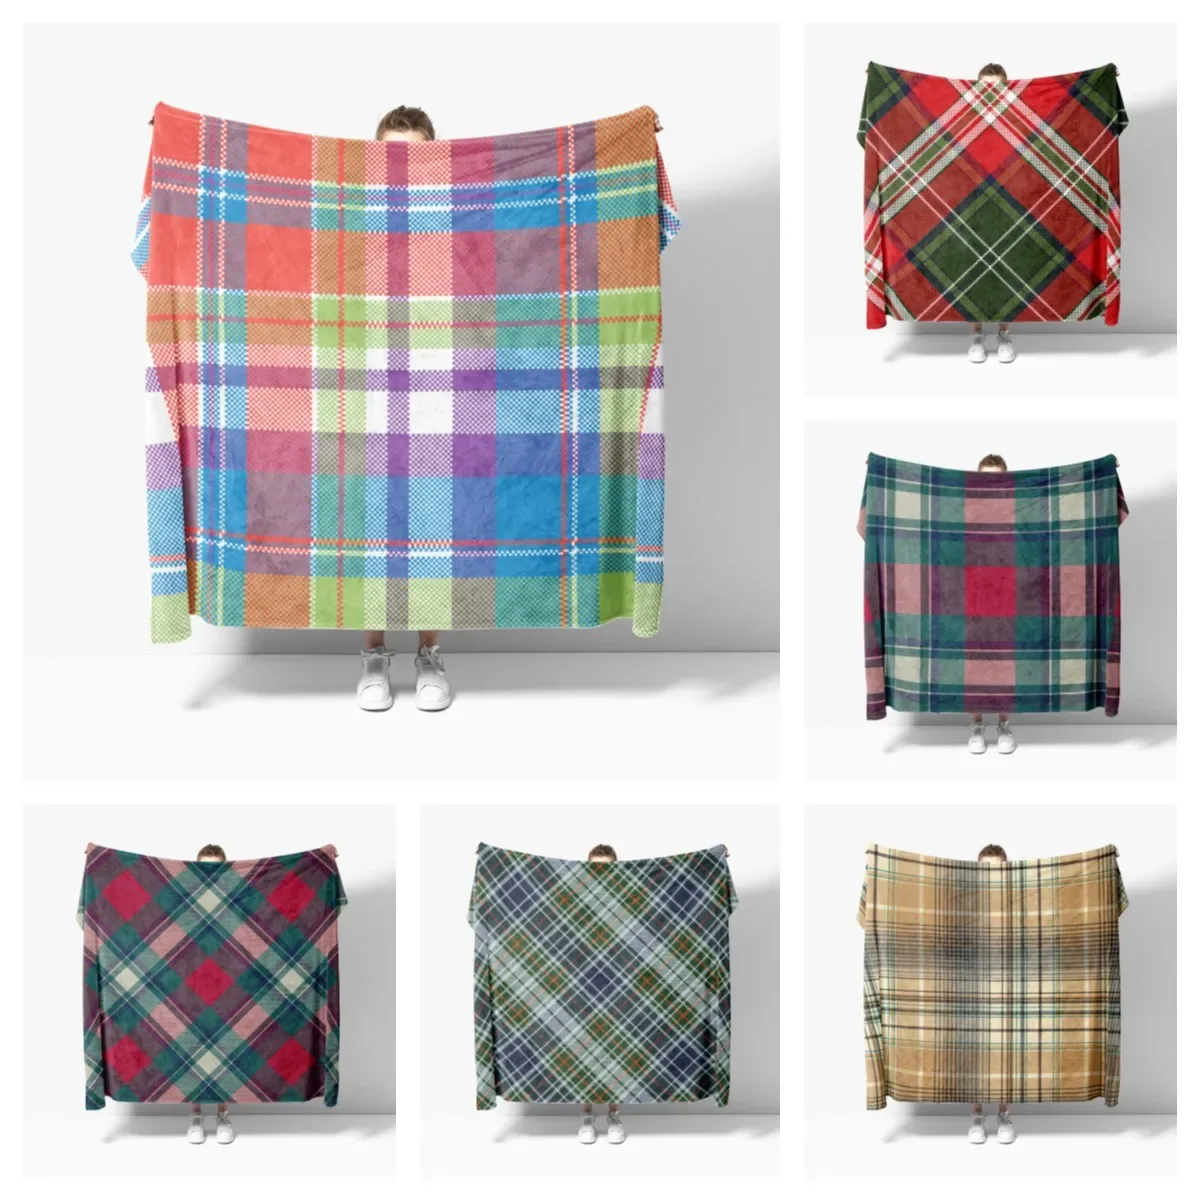 

Nordic Vintage Plaid Soft Flannel Blanket Breathable Ultra Warm Bedding & Travel Blankets Customizable Bed Blankets